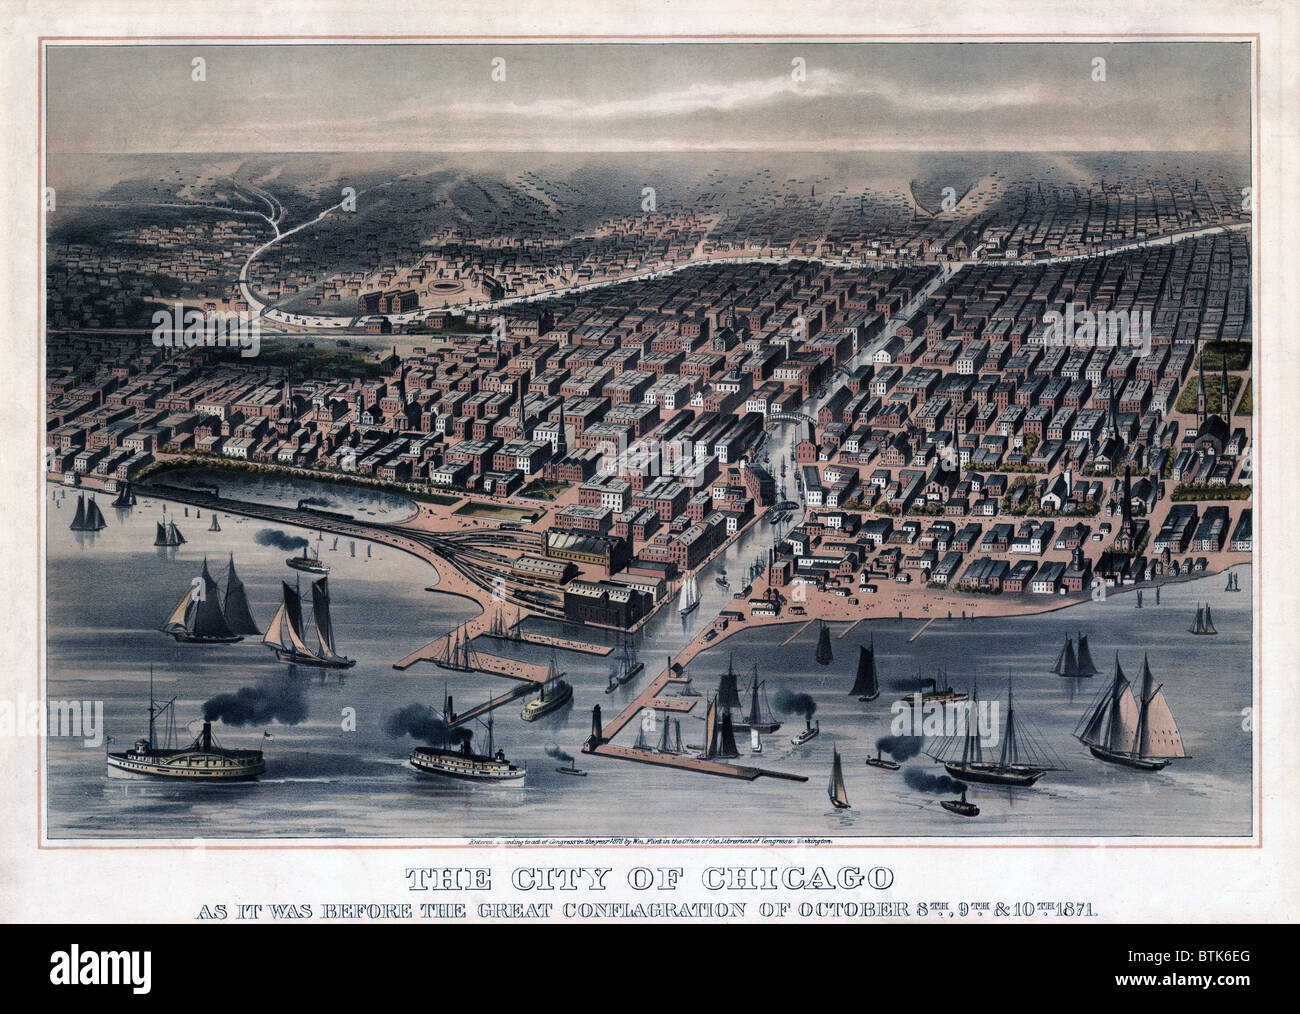 Chicago. The City of Chicago as it was before the great conflagration of October 8th, 9th, & 10th, 1871. color lithograph 1872. Stock Photo